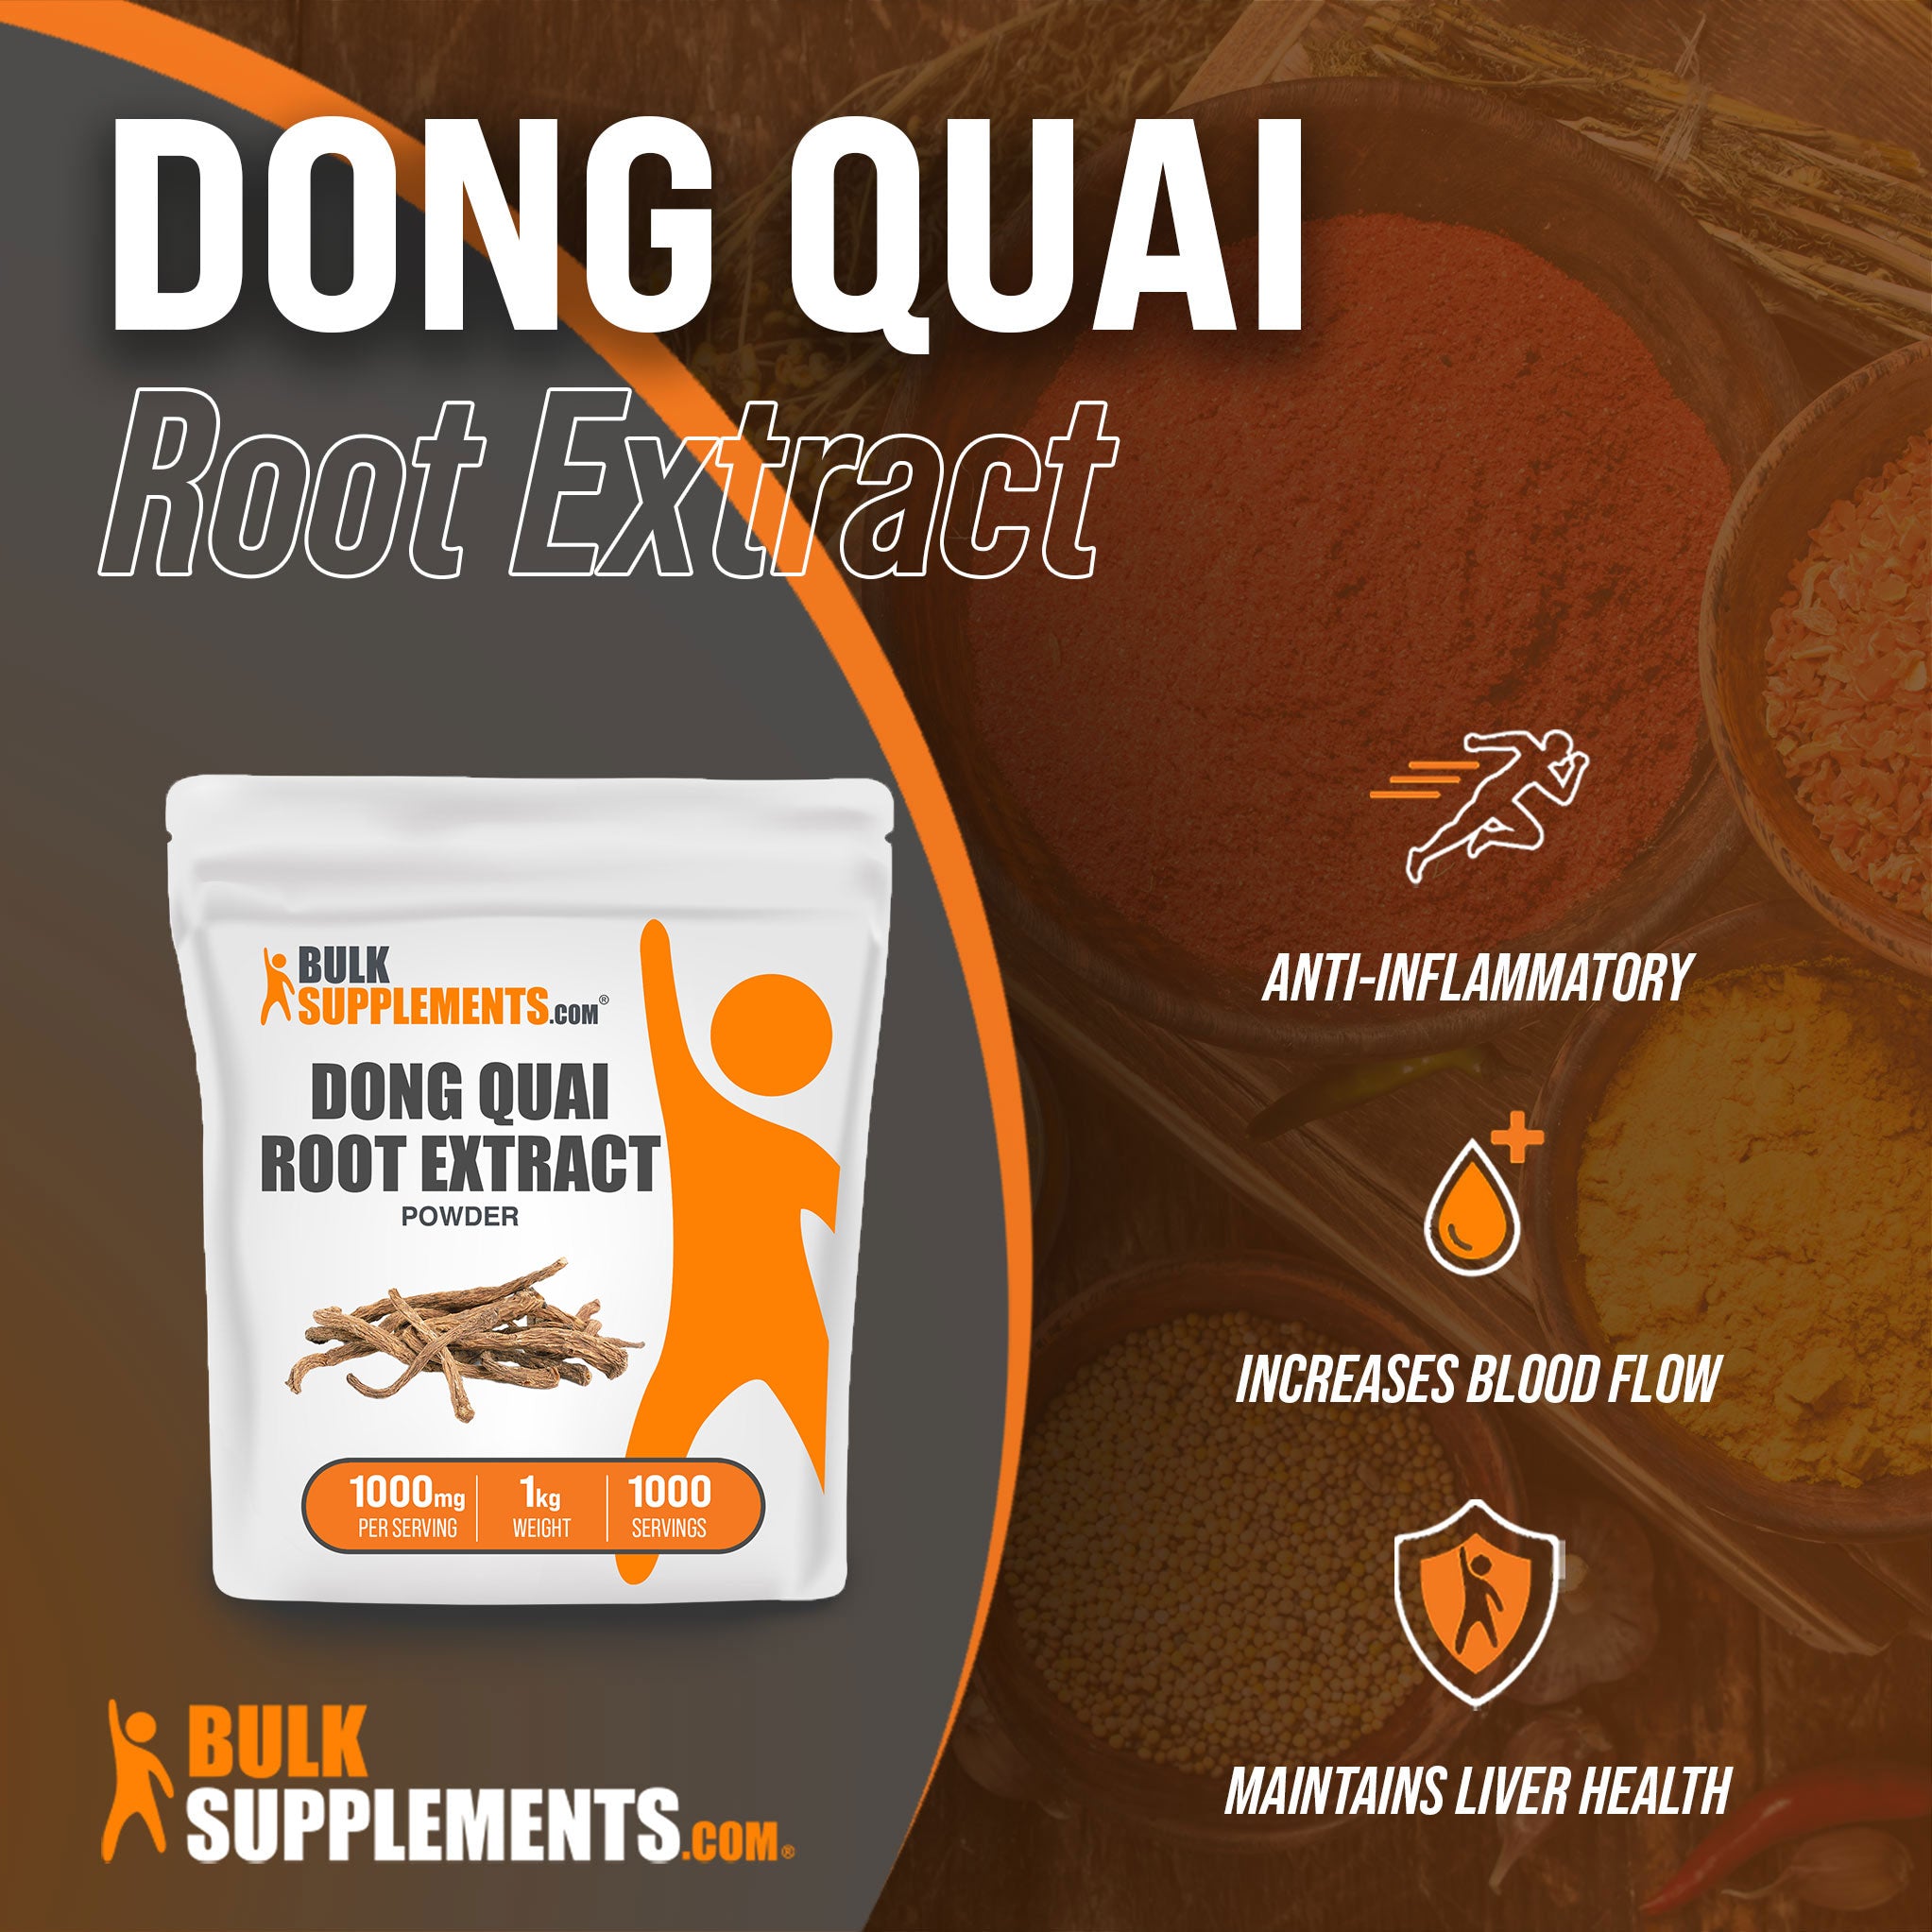 Benefits of Dong Quai Root Extract; anti-inflammatory, increase blood flow, maintains liver health